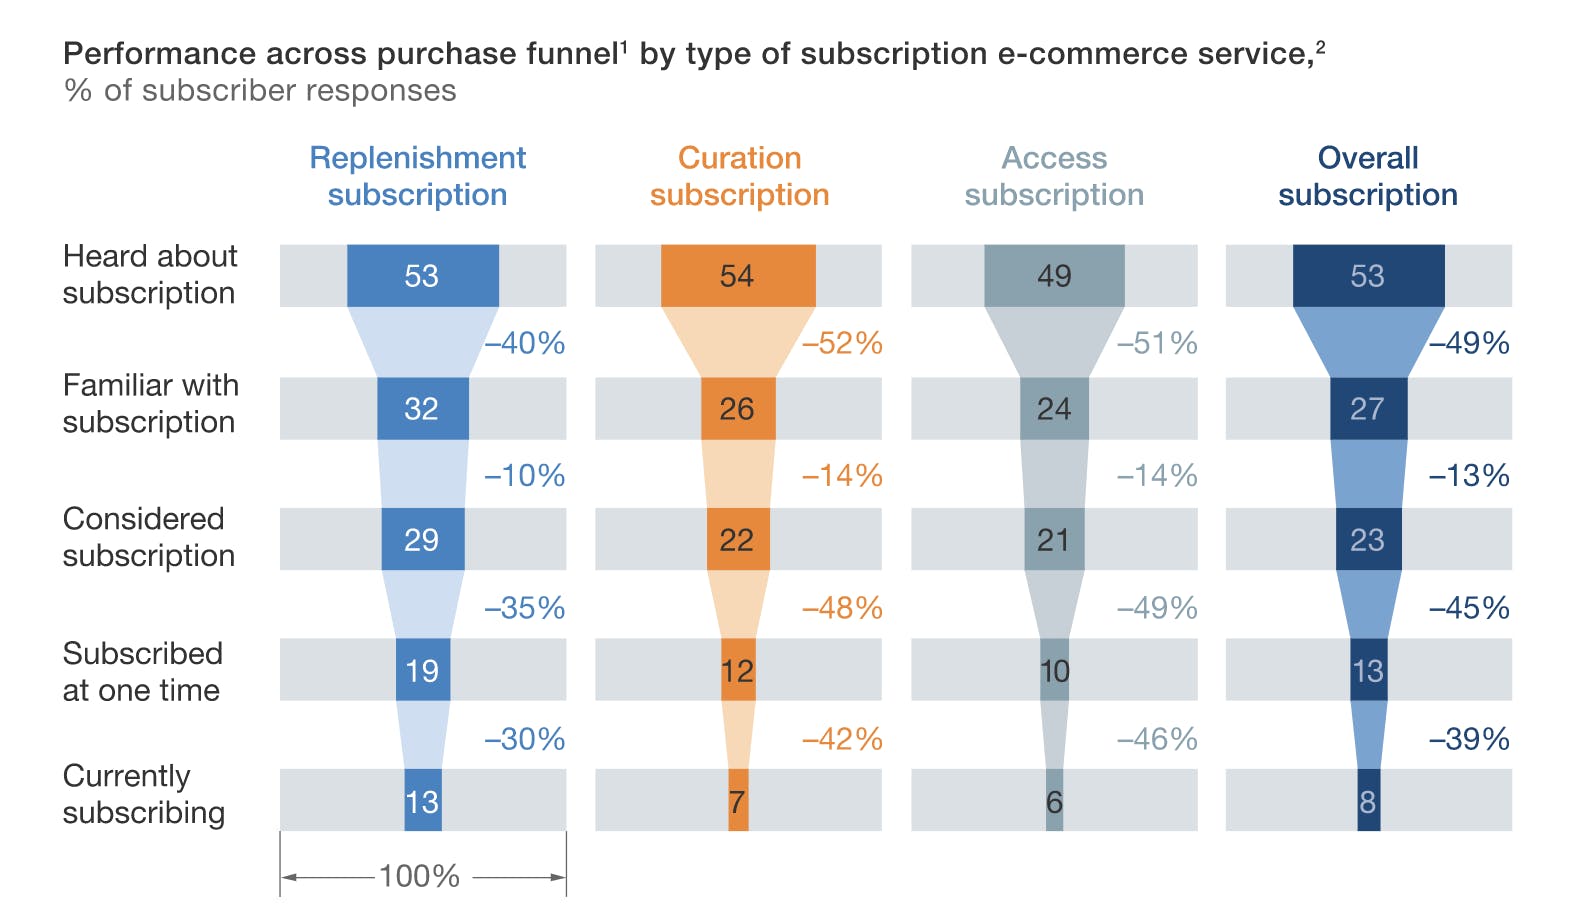 Performance across purchase funnel by type of subscription e-commerce service 